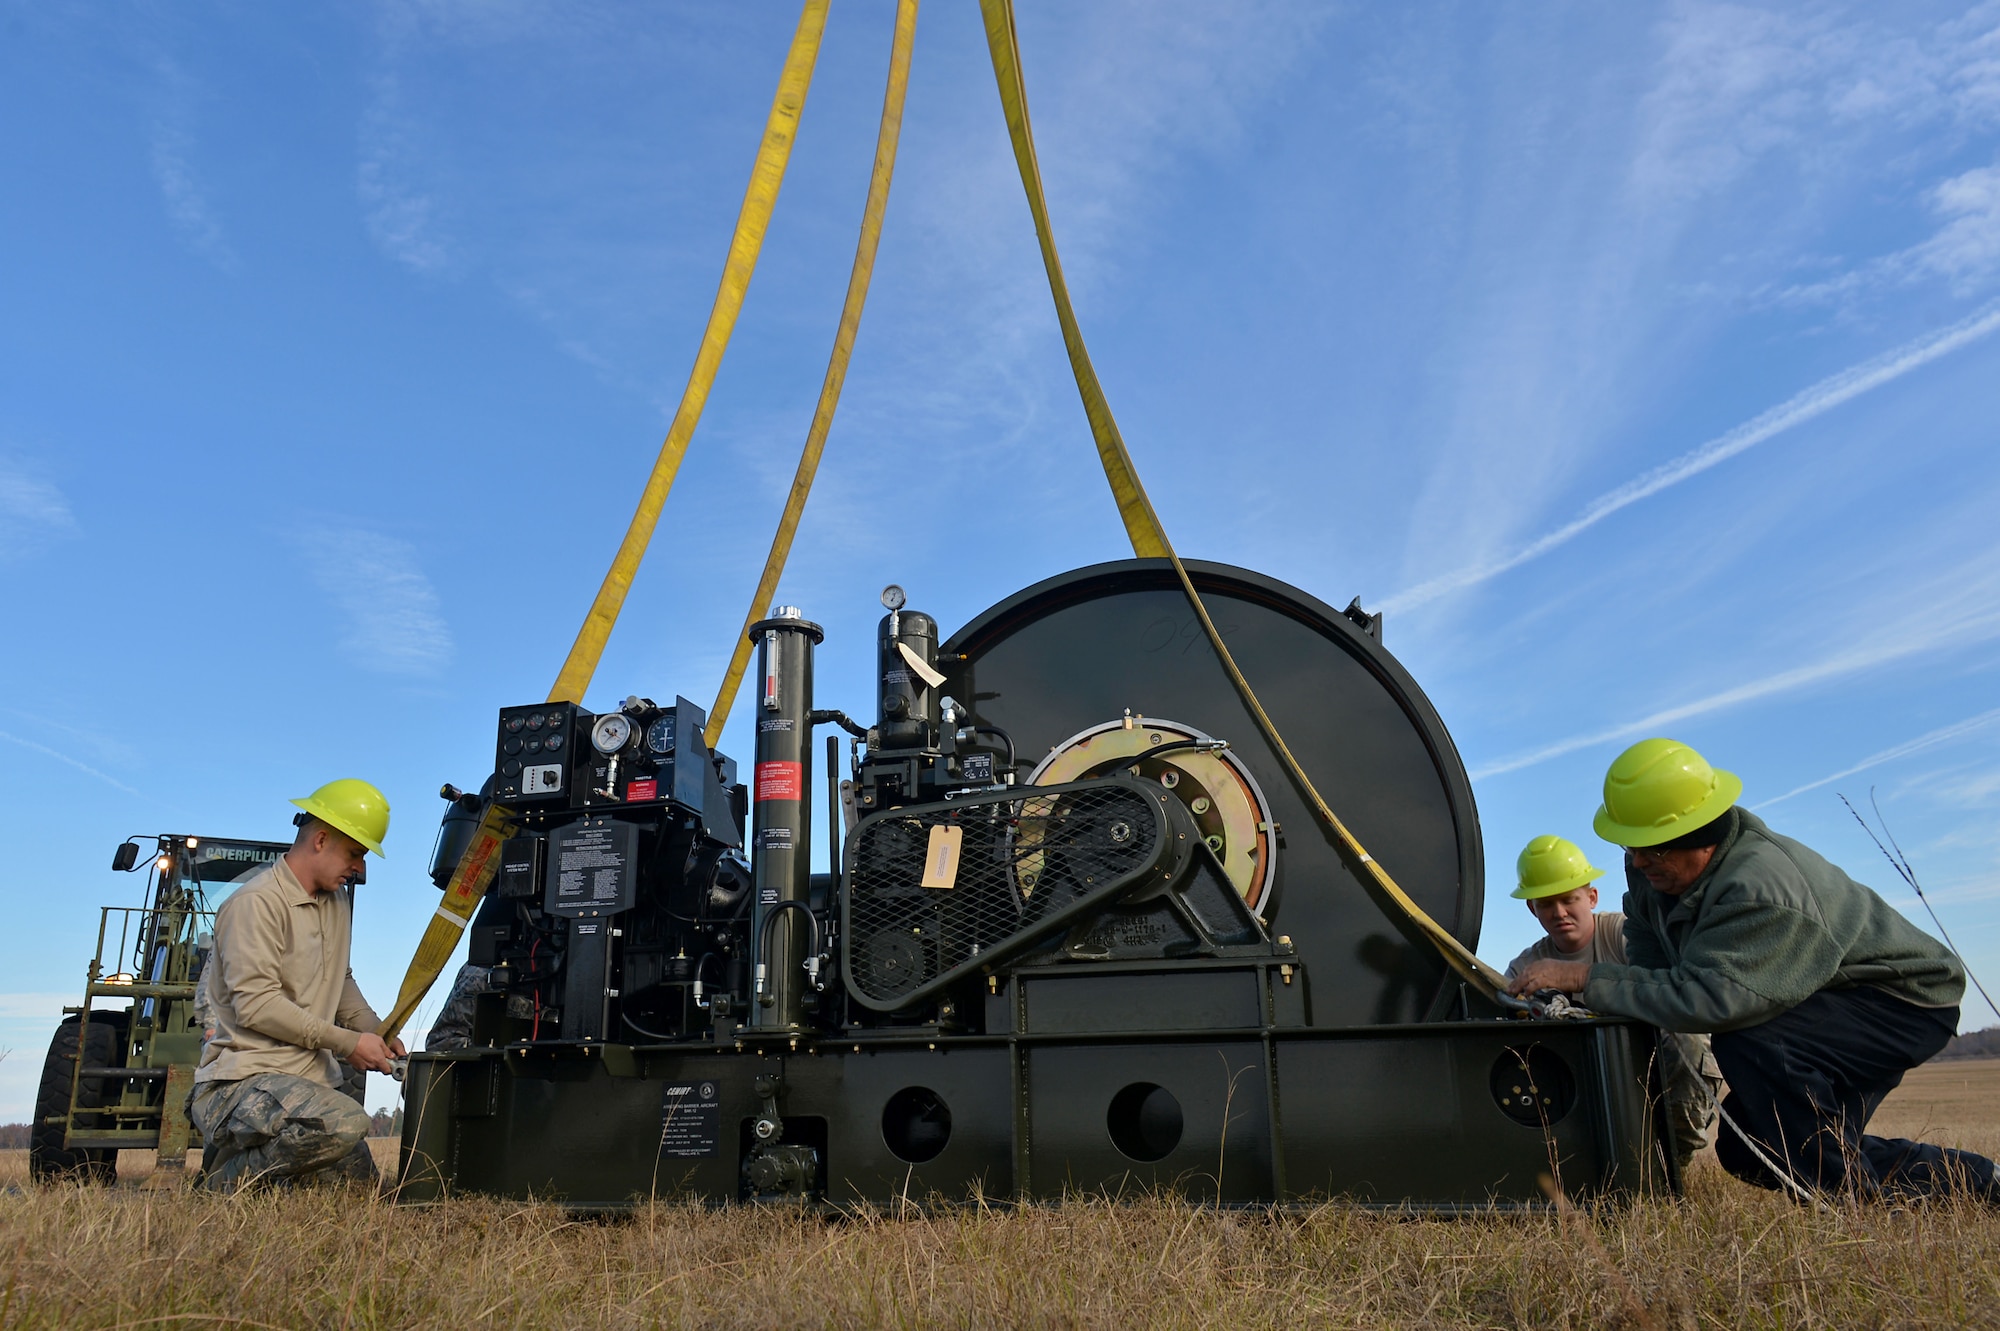 U.S. Airmen and contractors assigned to the 20th Civil Engineer Squadron power production flight perform the final check on a Barrier Artillery Kit-12 rotary friction brake aircraft arresting system at Shaw Air Force Base, S.C., Dec. 3, 2016. The newly installed arresting system is capable of withstanding a maximum of 65 million pounds of force when halting an aircraft. (U.S. Air Force photo by Airman 1st Class Christopher Maldonado)